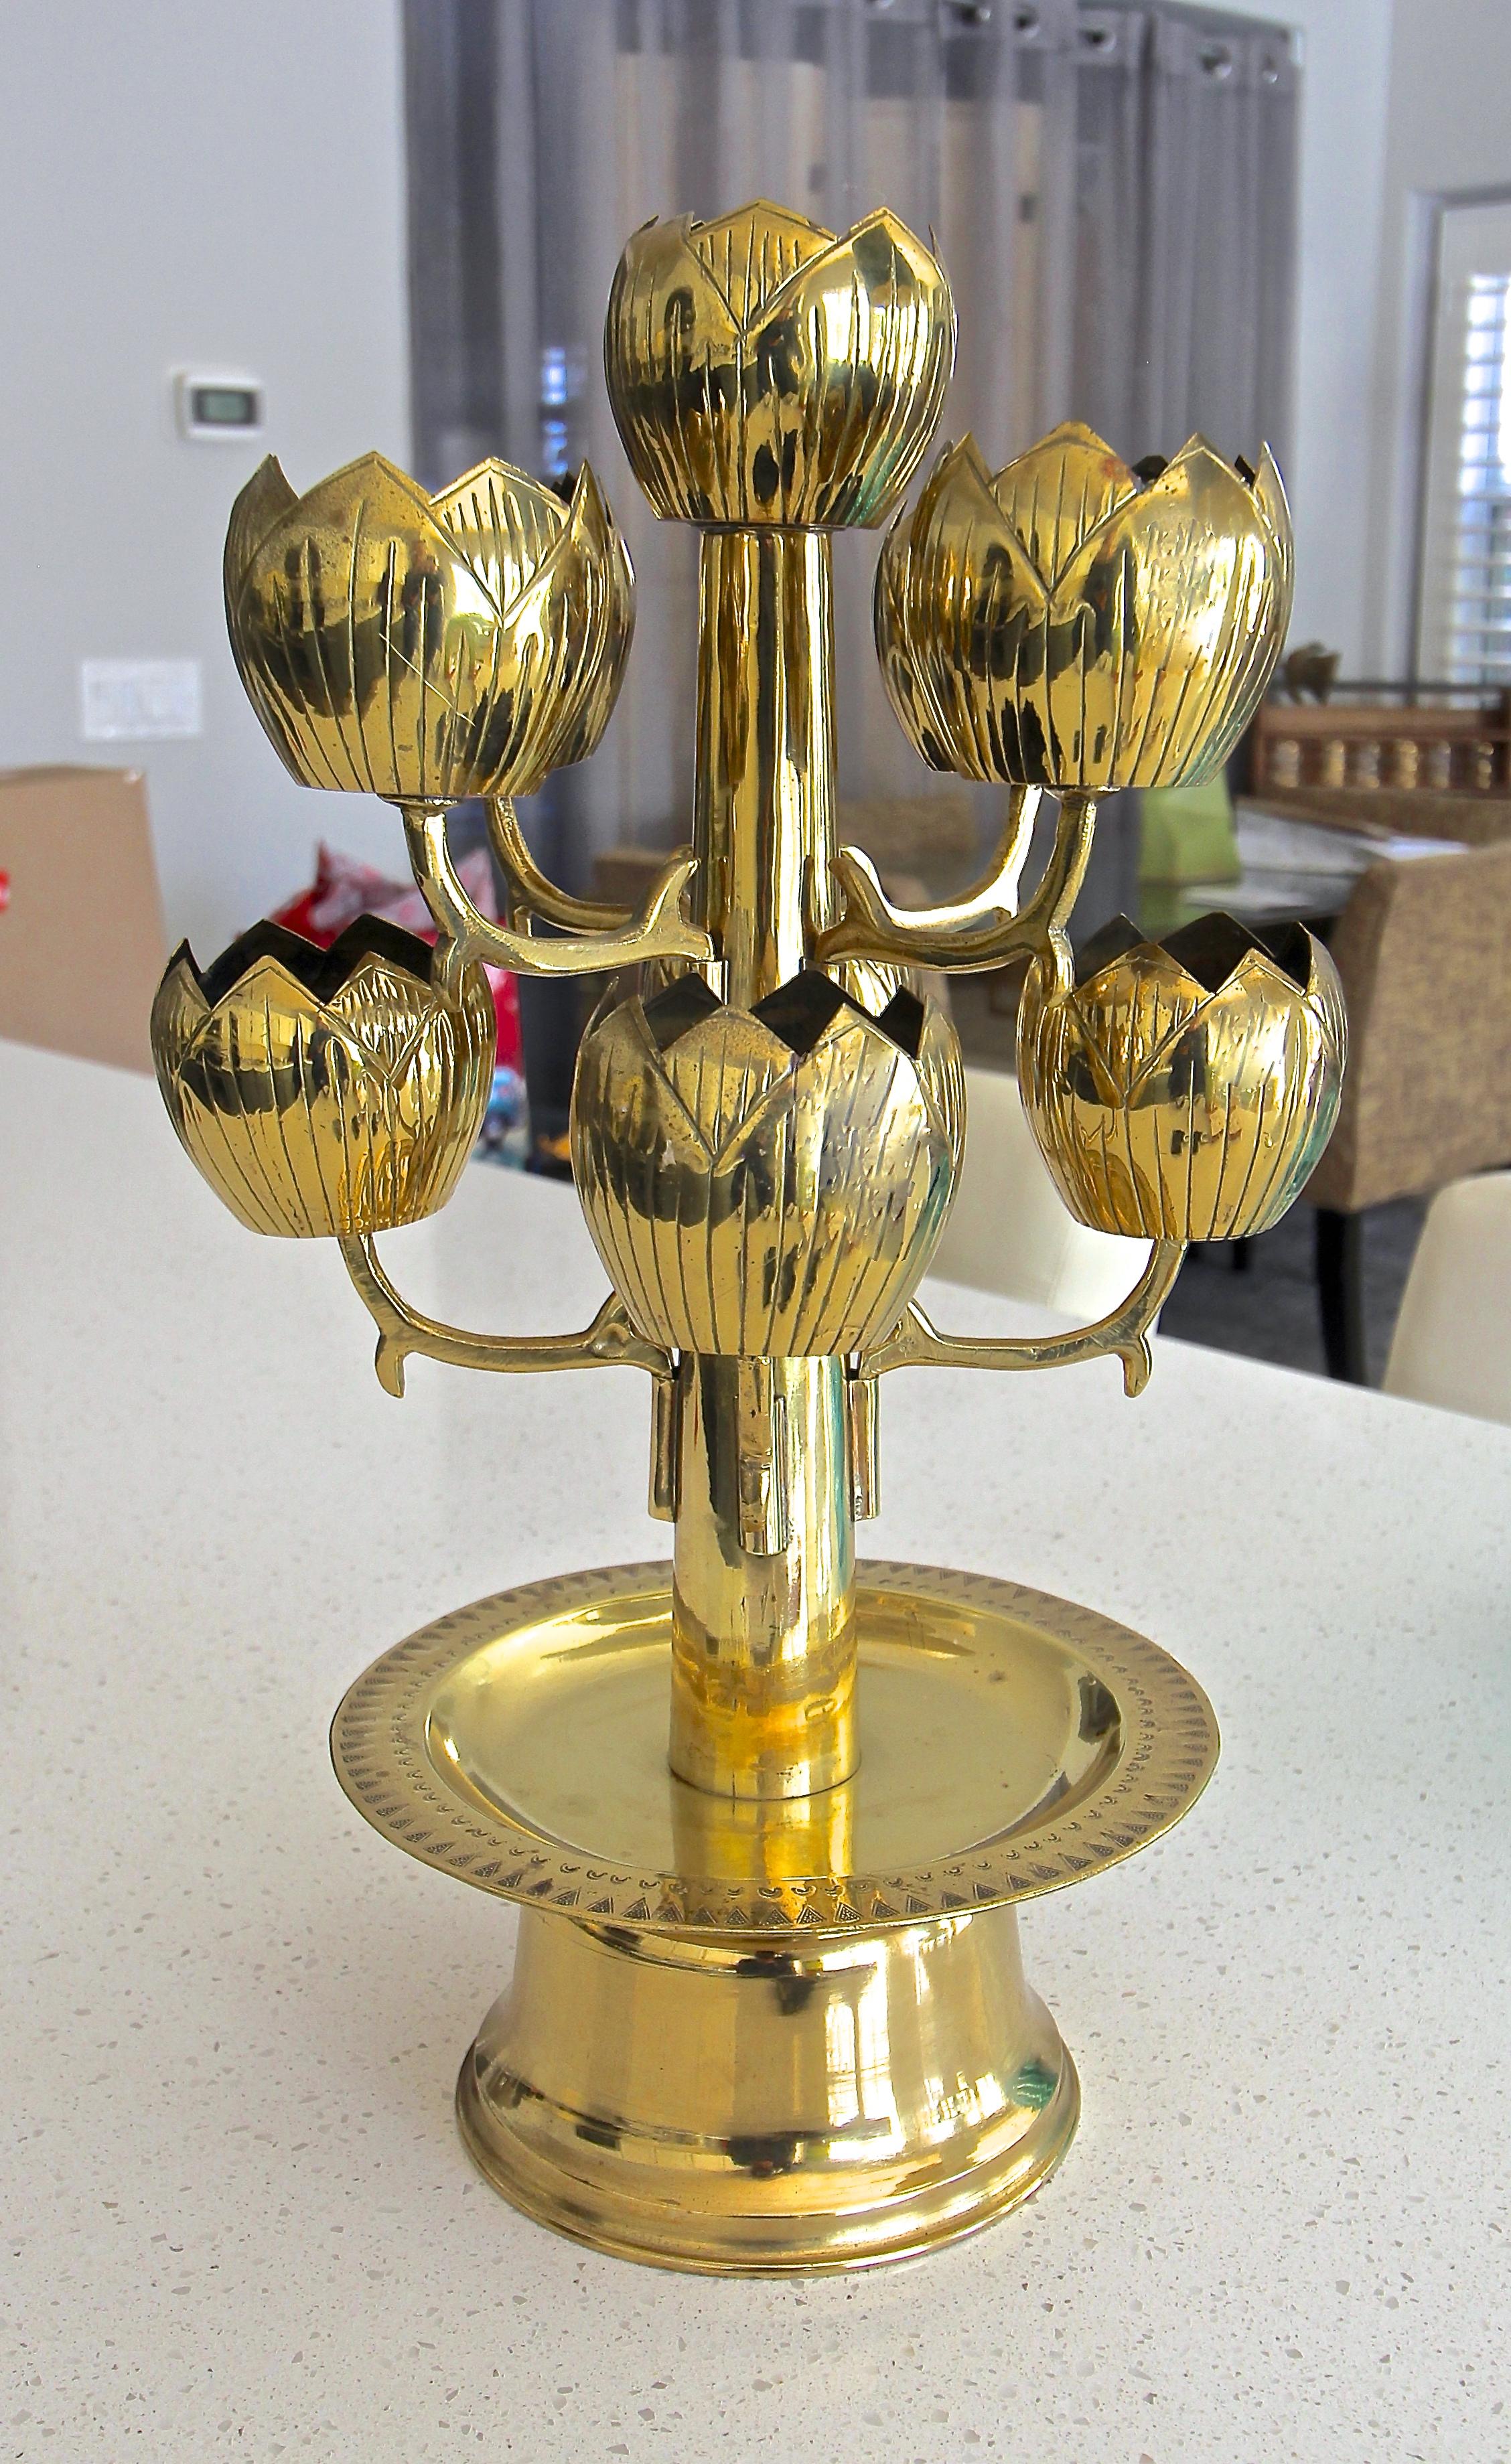 A brass lotus flower 9 cup candleholder or candelabra, attributed to Feldman Lighting Company. Designed to hold votive candles.